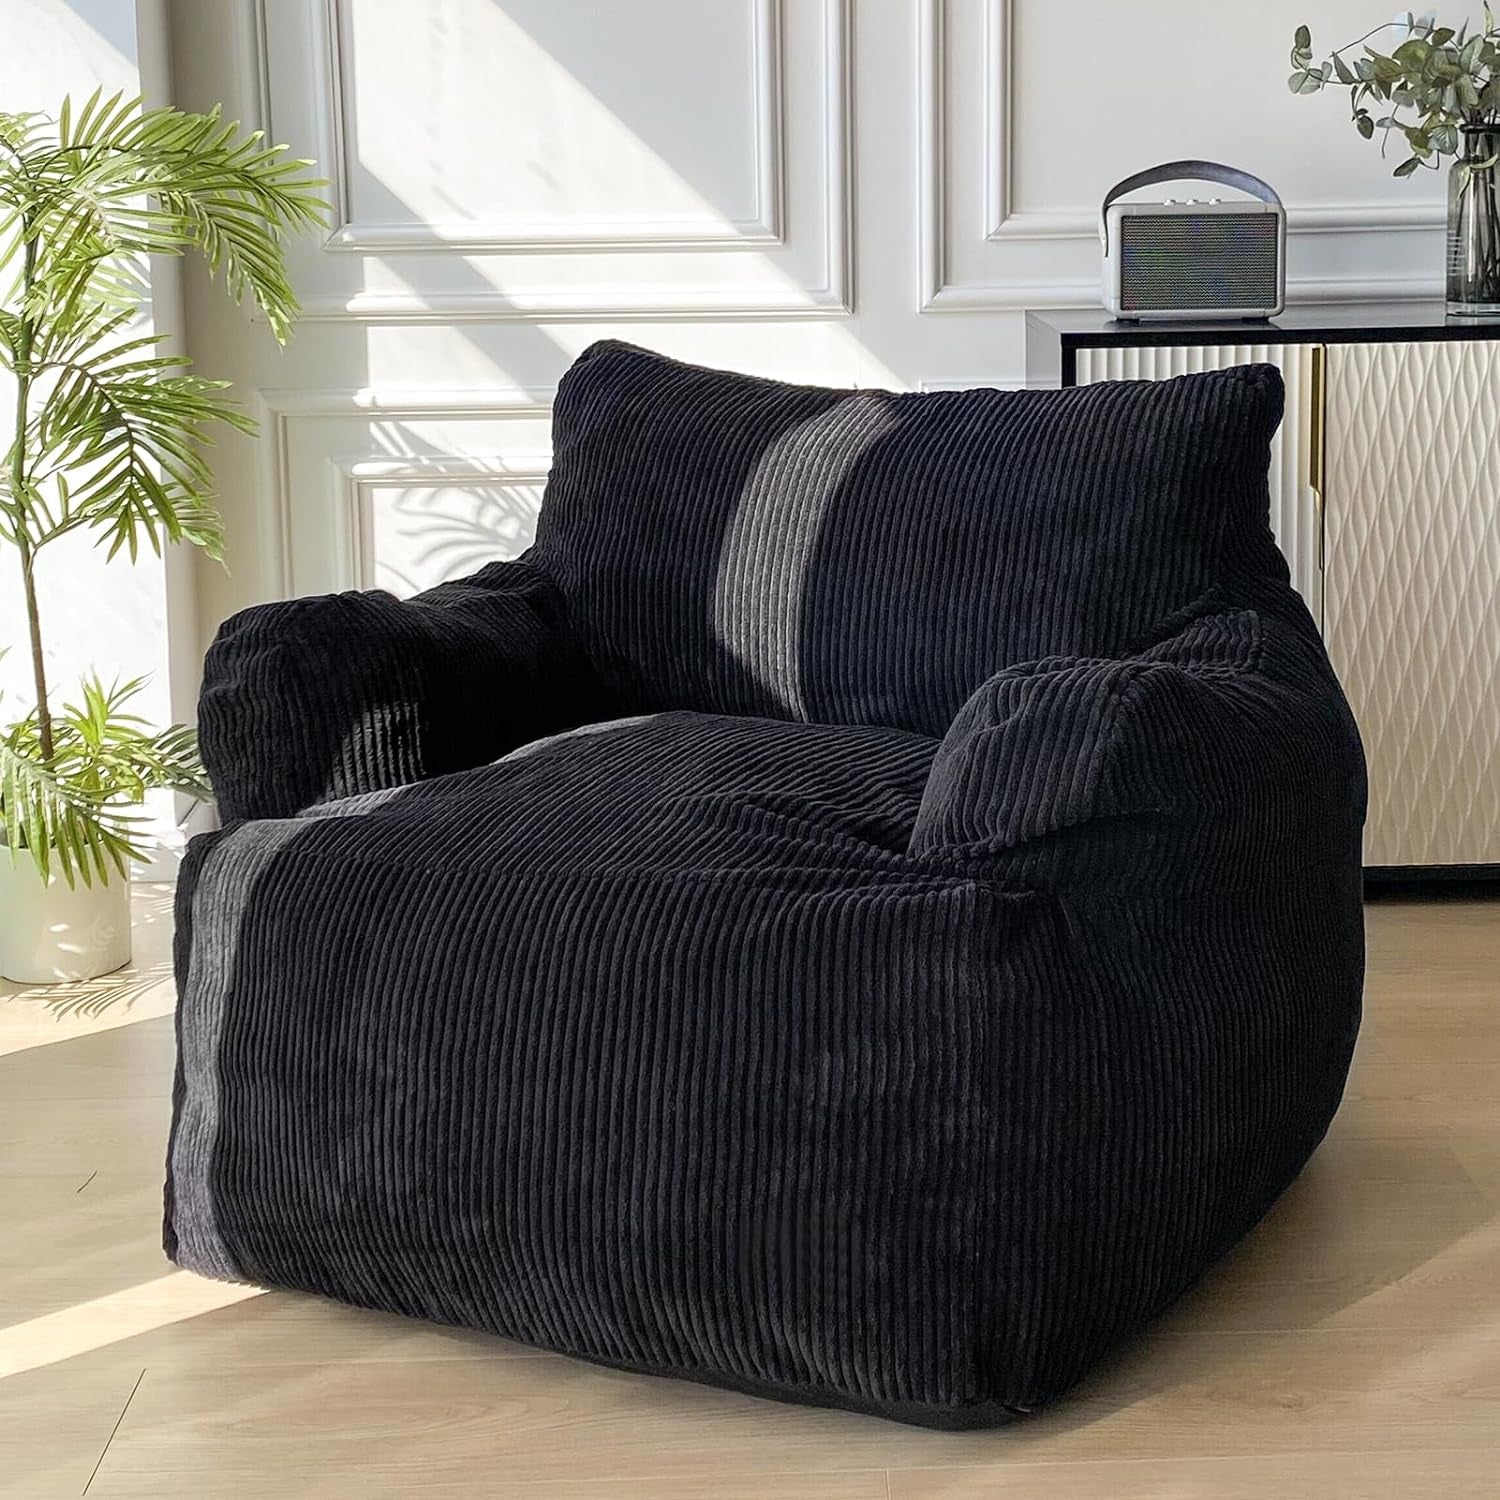 Giant Bean Bag Chair, Stuffed Bean Bag Couch with Filler Large Living Room Bean Bag Chair for Adults, Big Lazy Sofa Accent Chair with Pocket Floor Chair for Gaming, Reading, Black